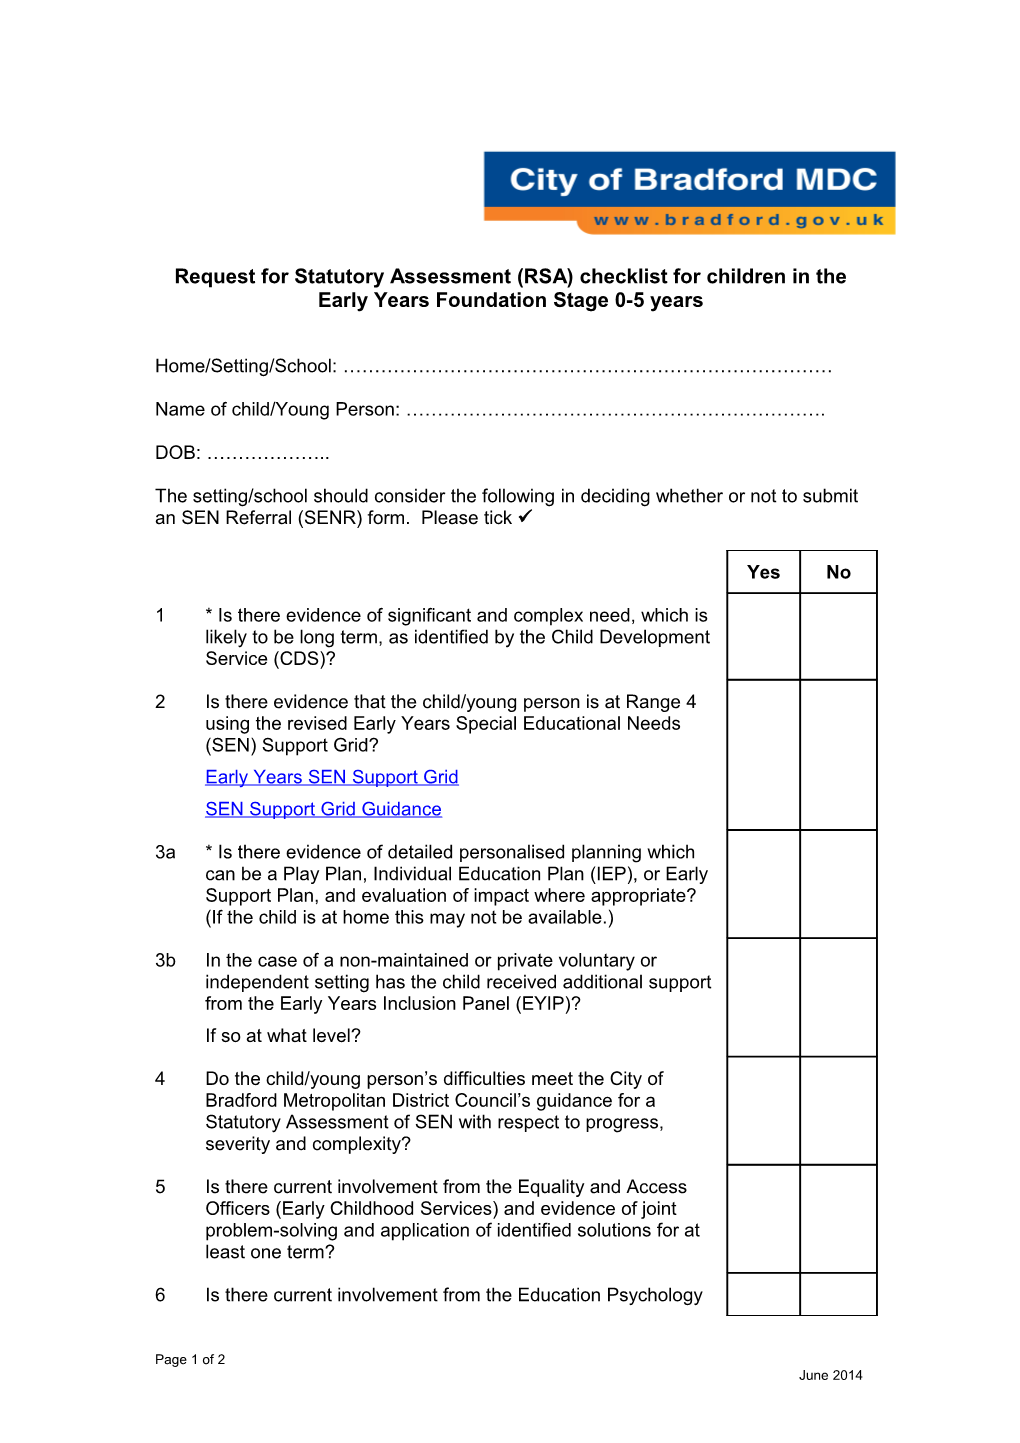 Request for Statutory Assessment (RSA) Checklist for Children in the Early Years Foundation